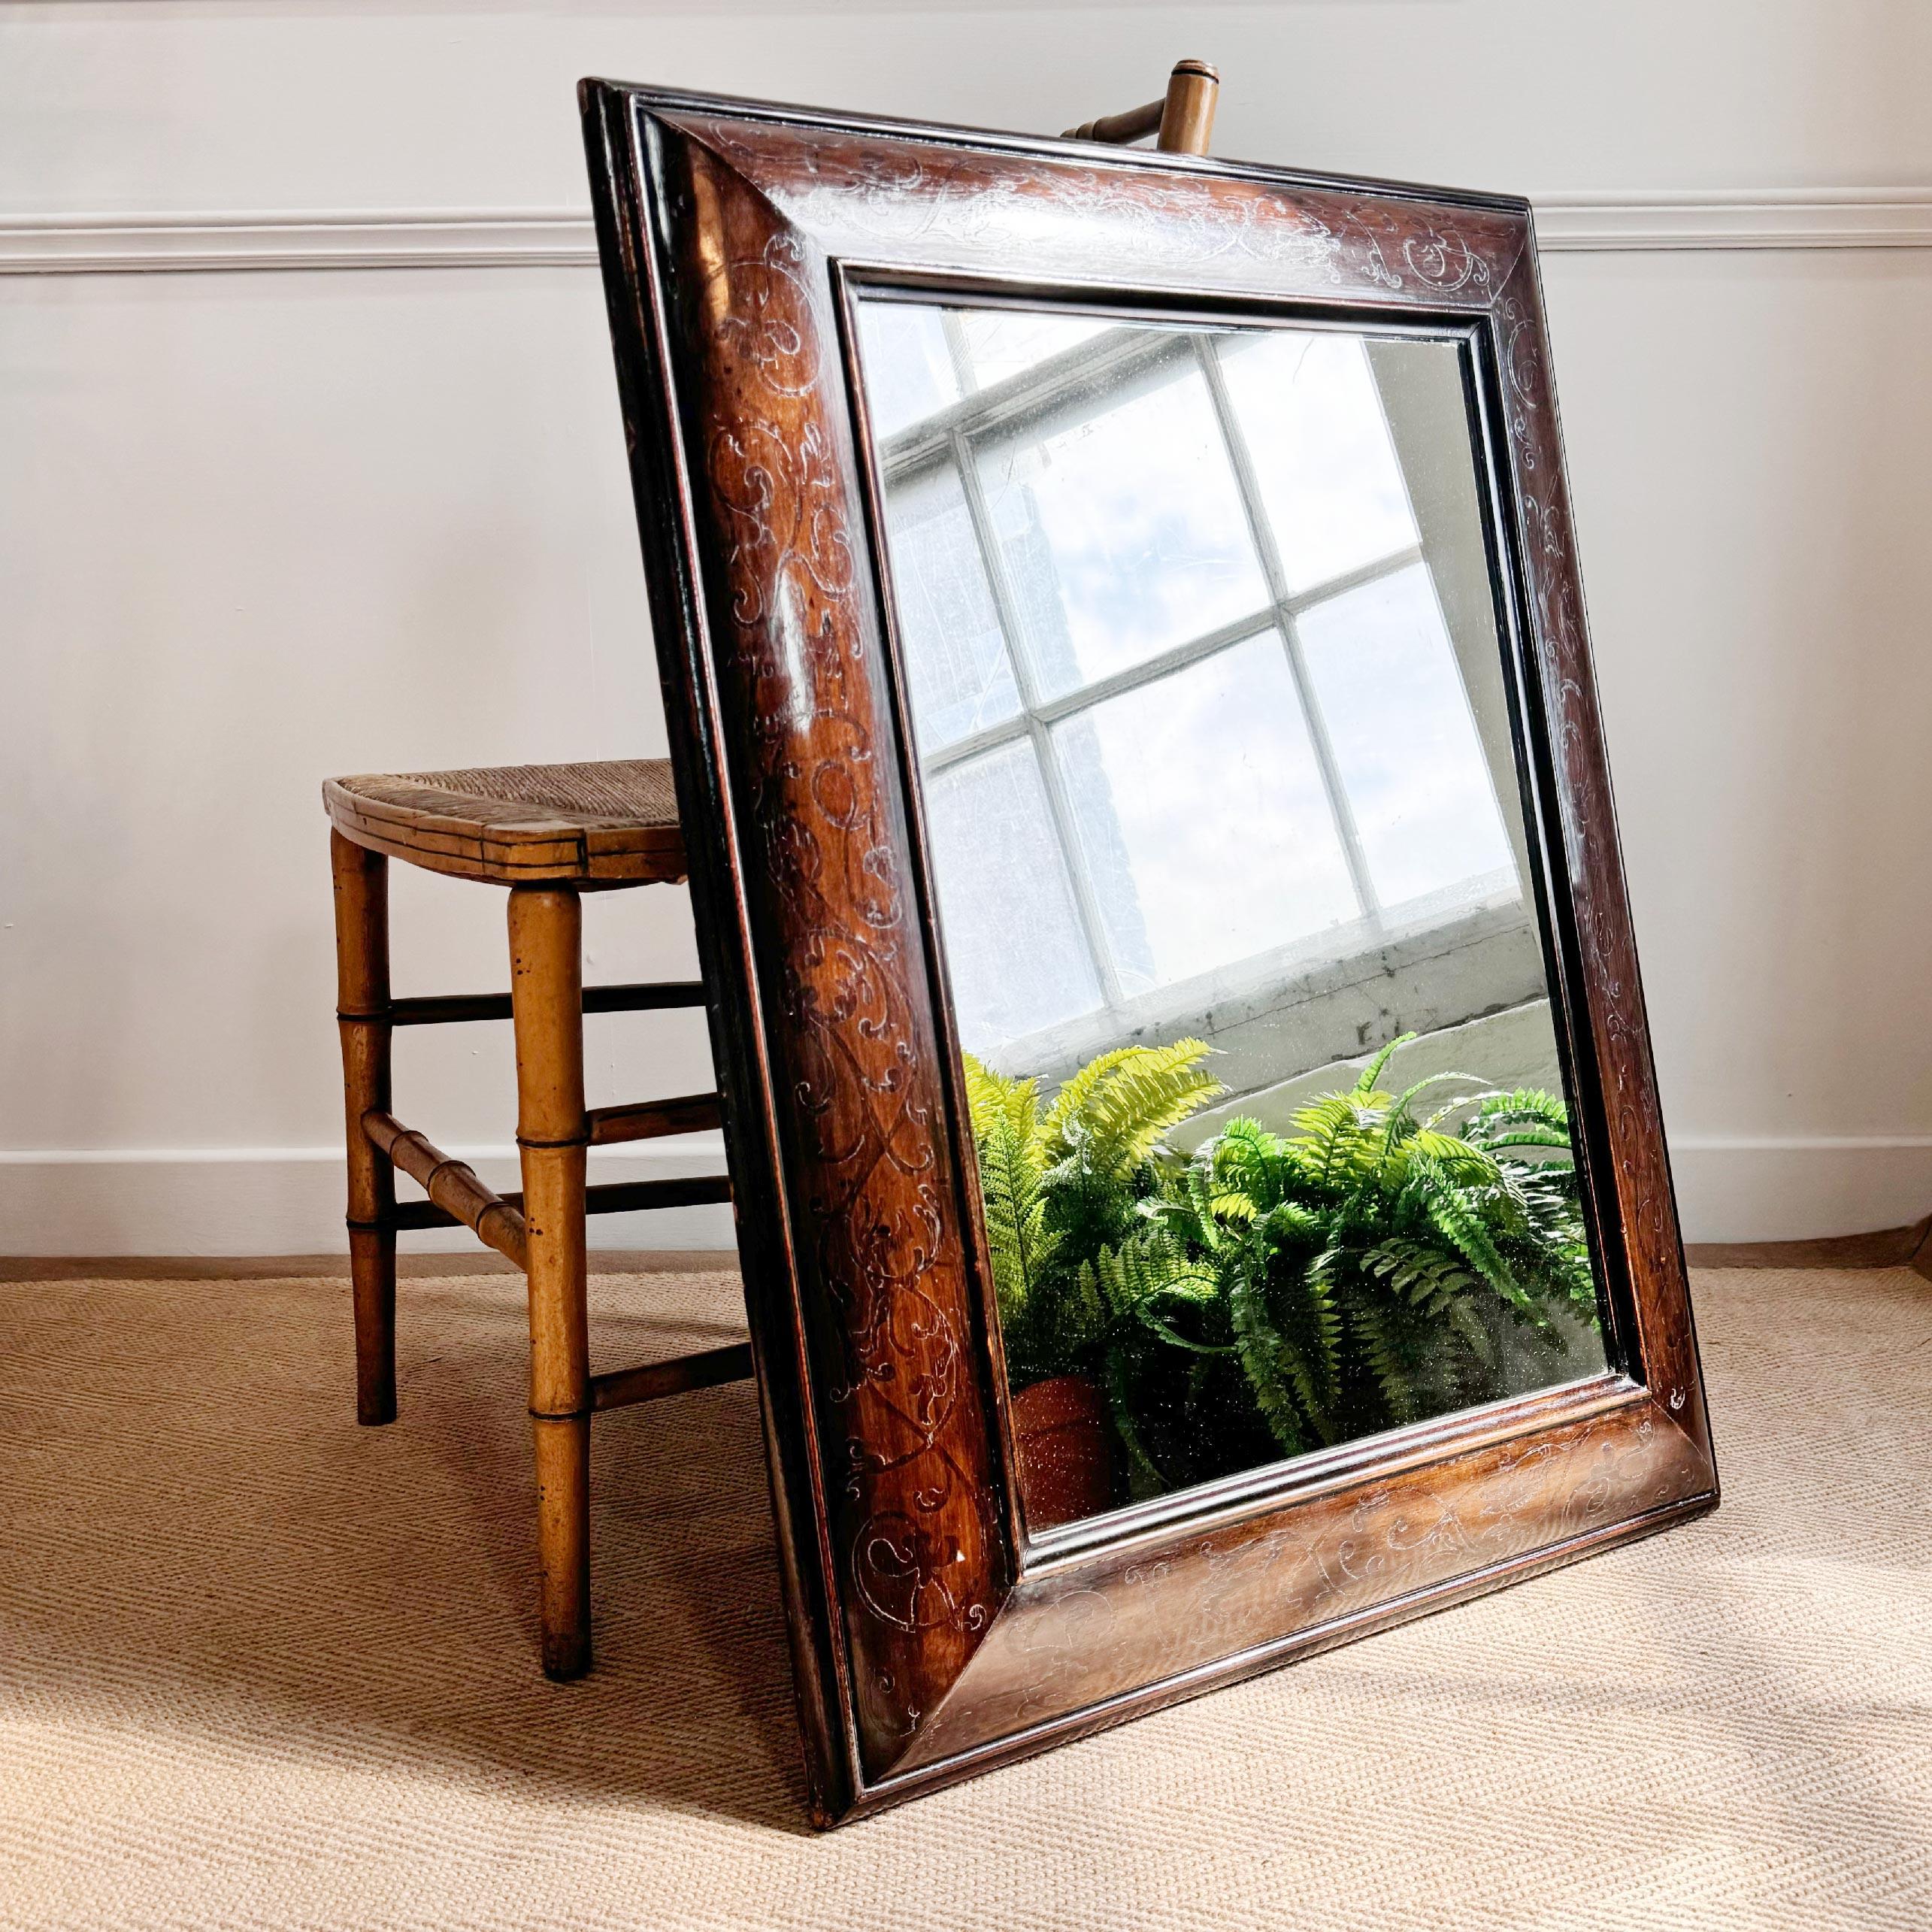 Early 18th Century Exceptional 18th Century Marquetry Mirror in the William and Mary style For Sale